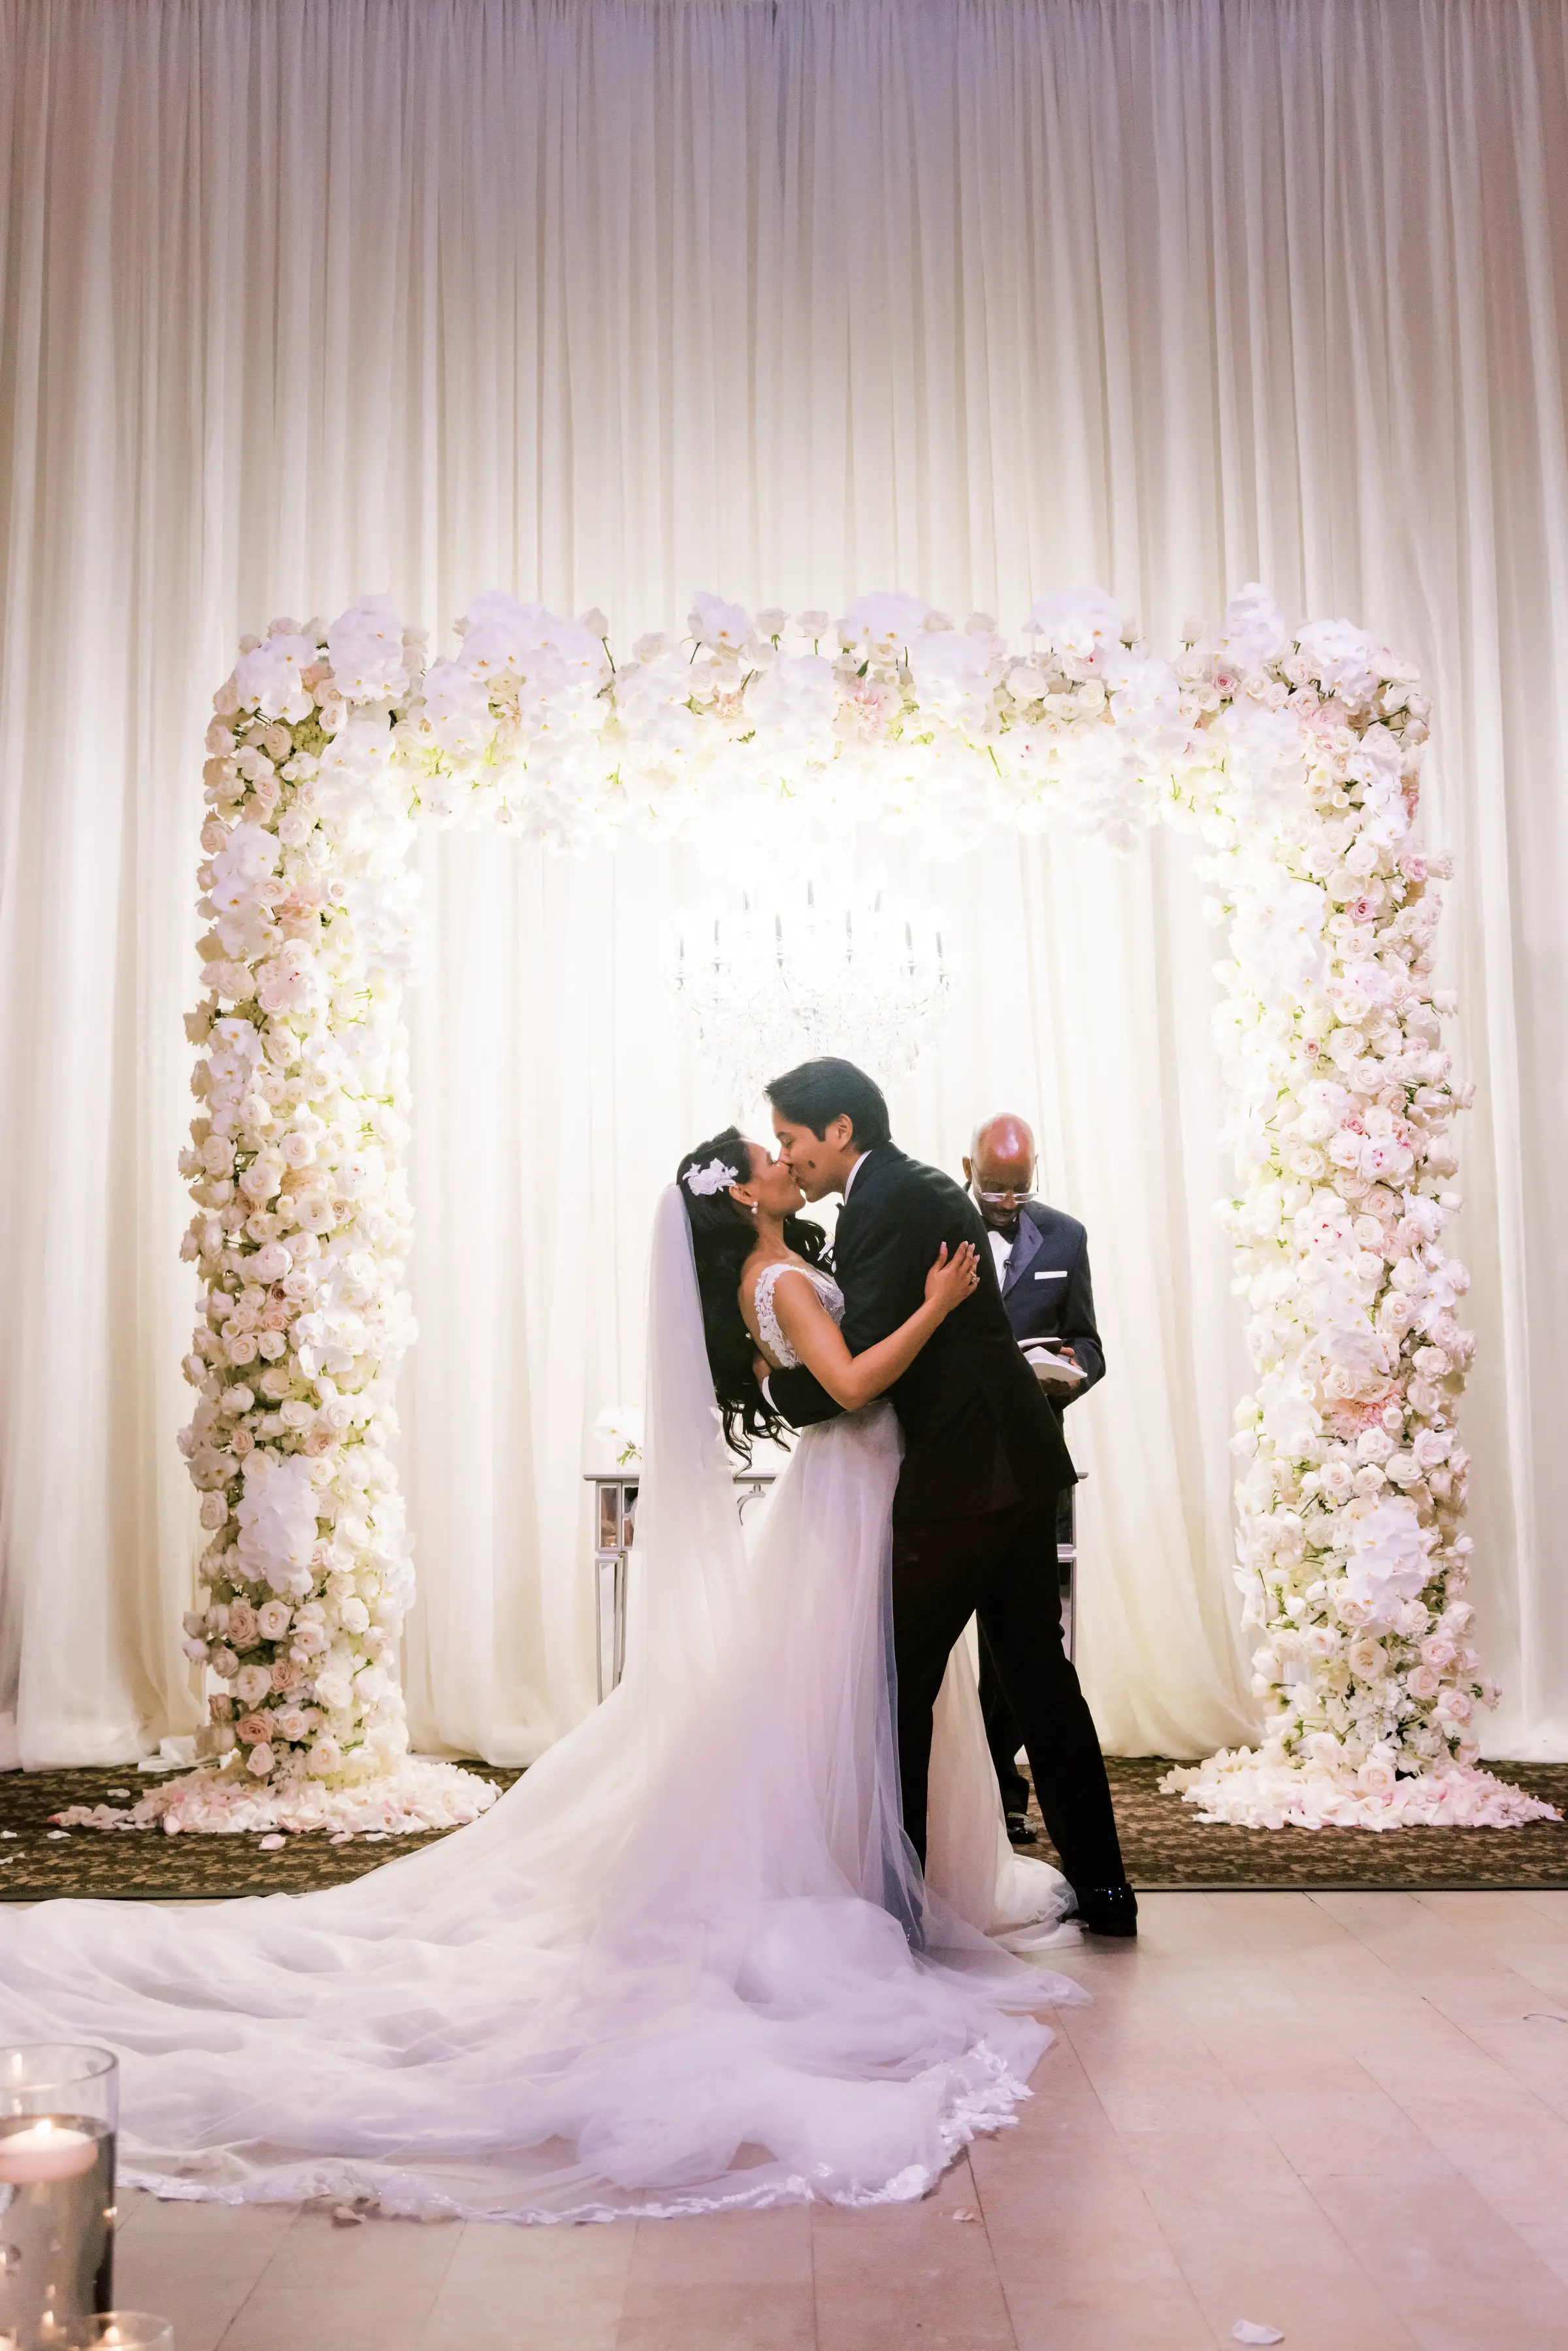 Luxury Ballroom Wedding Ceremony with floral arch - Photography: Brooke Images